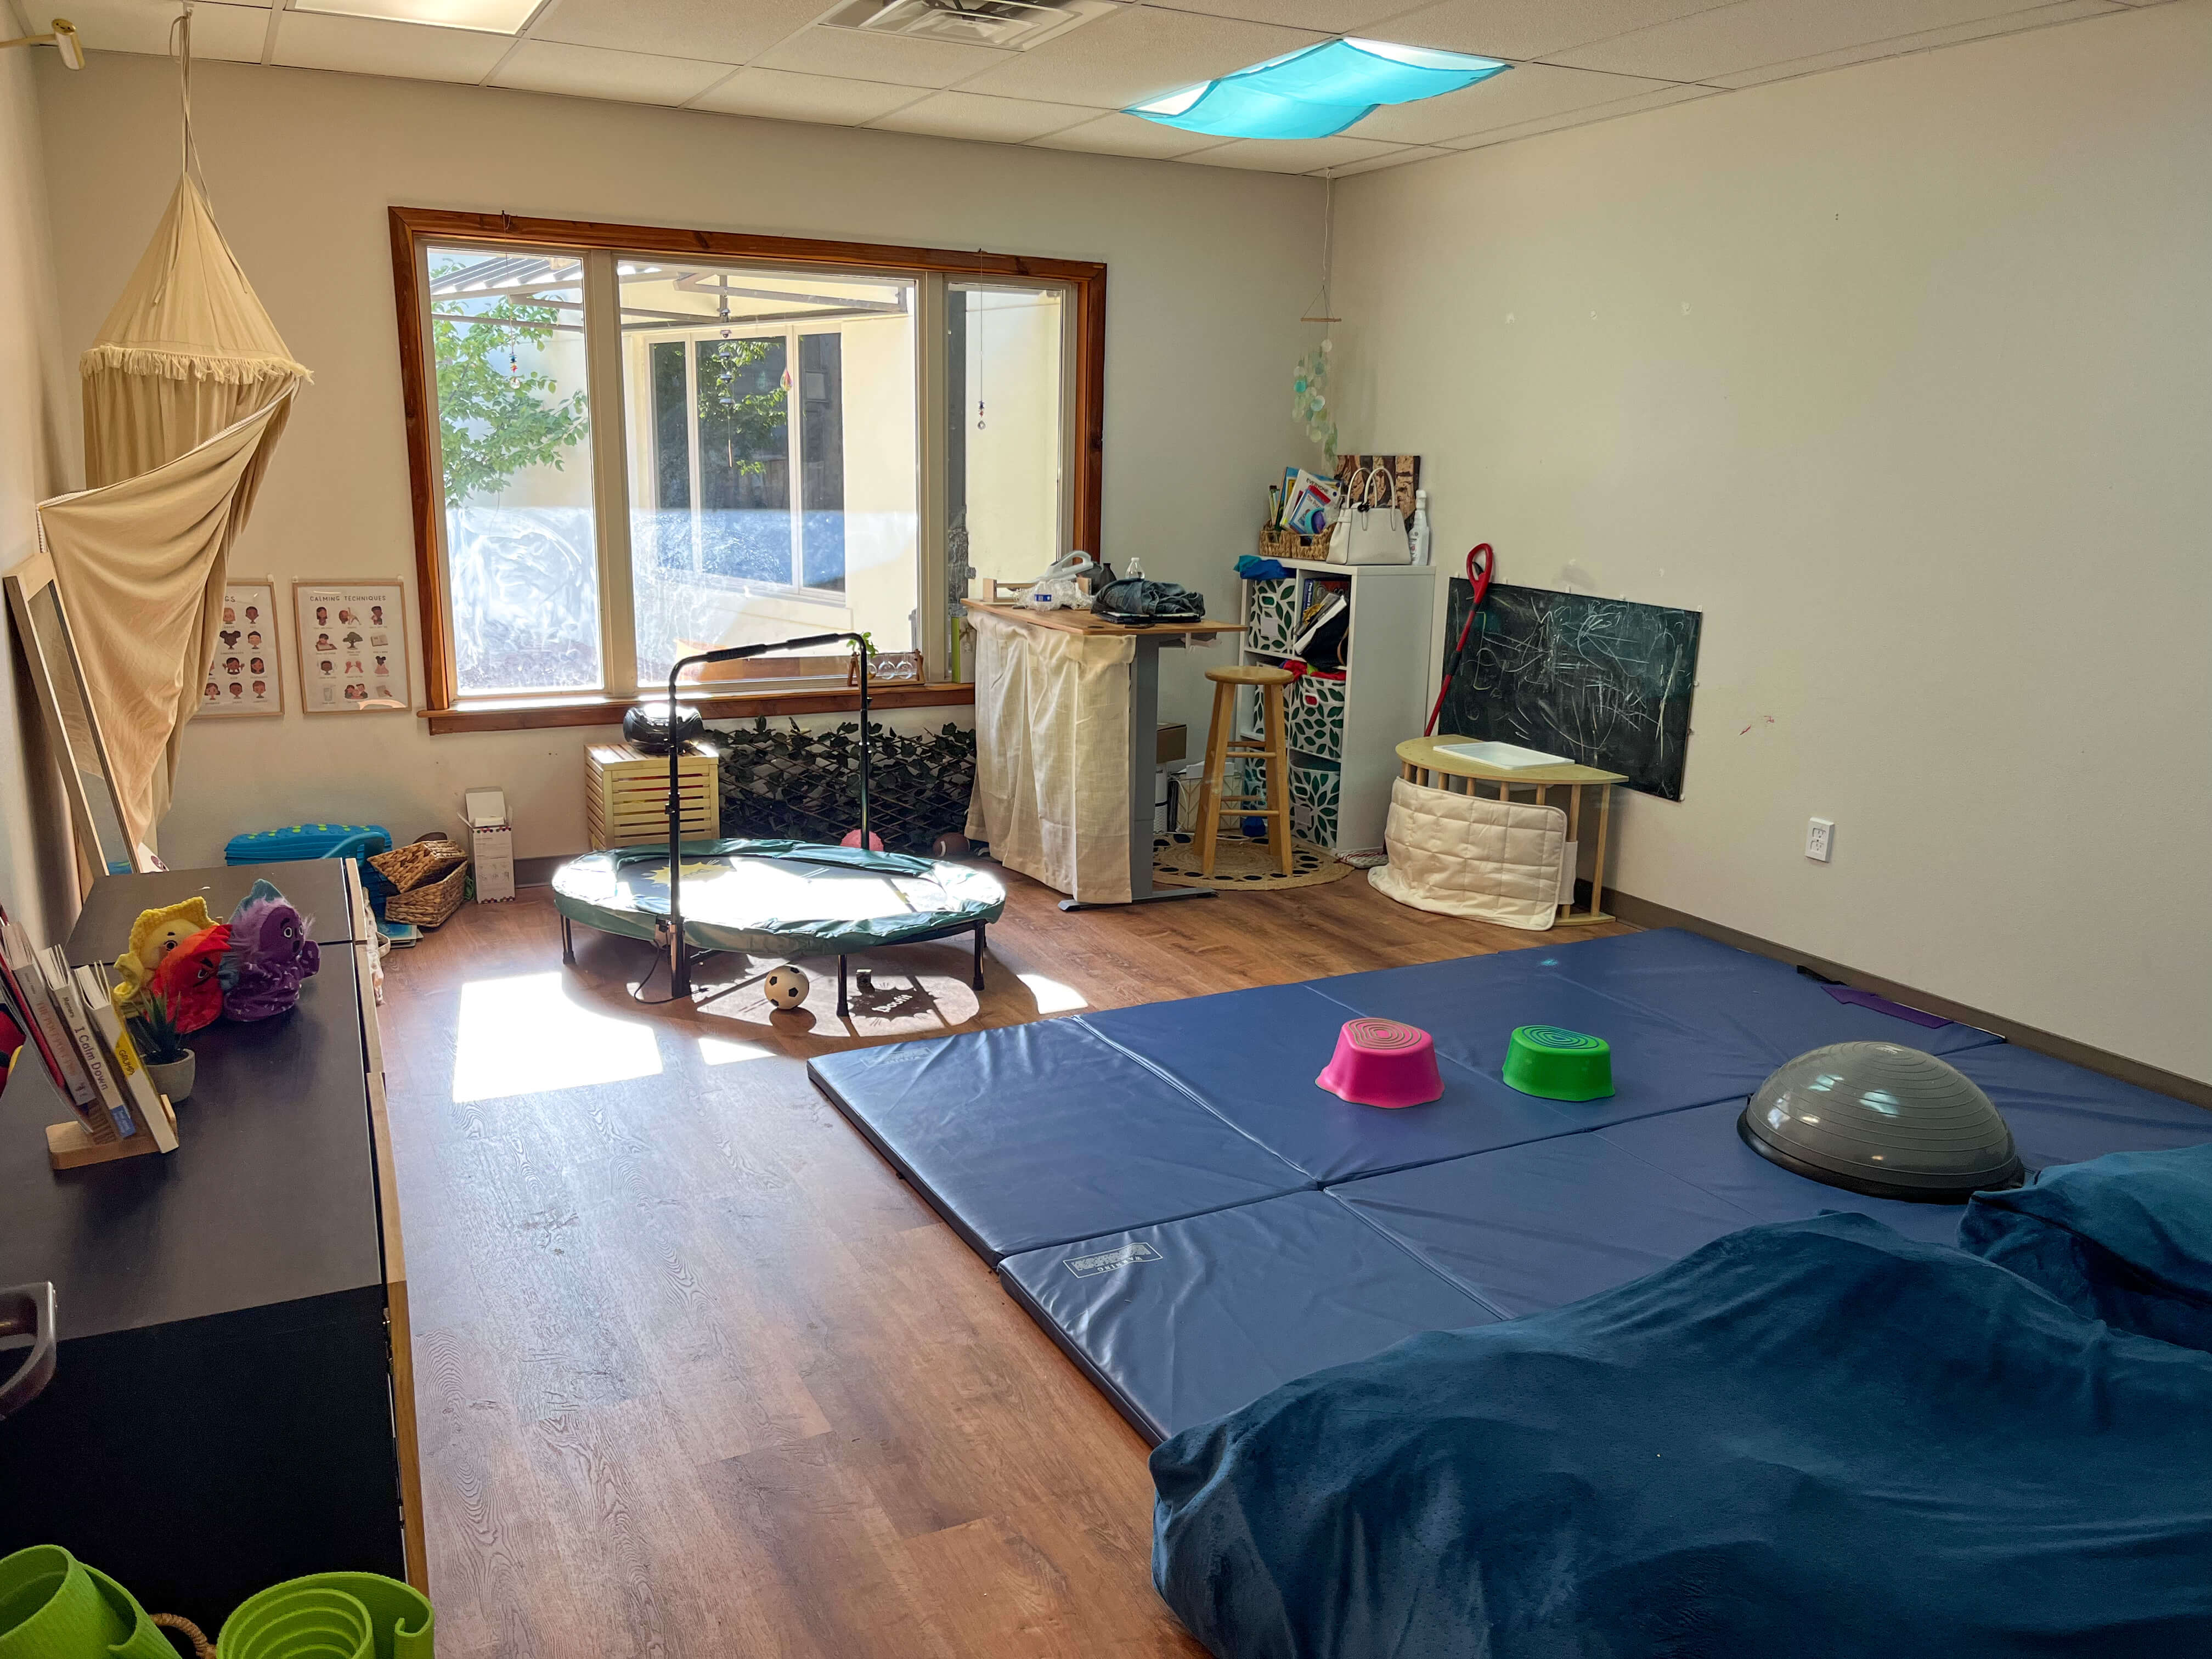 A space is shown with floormats and materials to engage gross motor skills